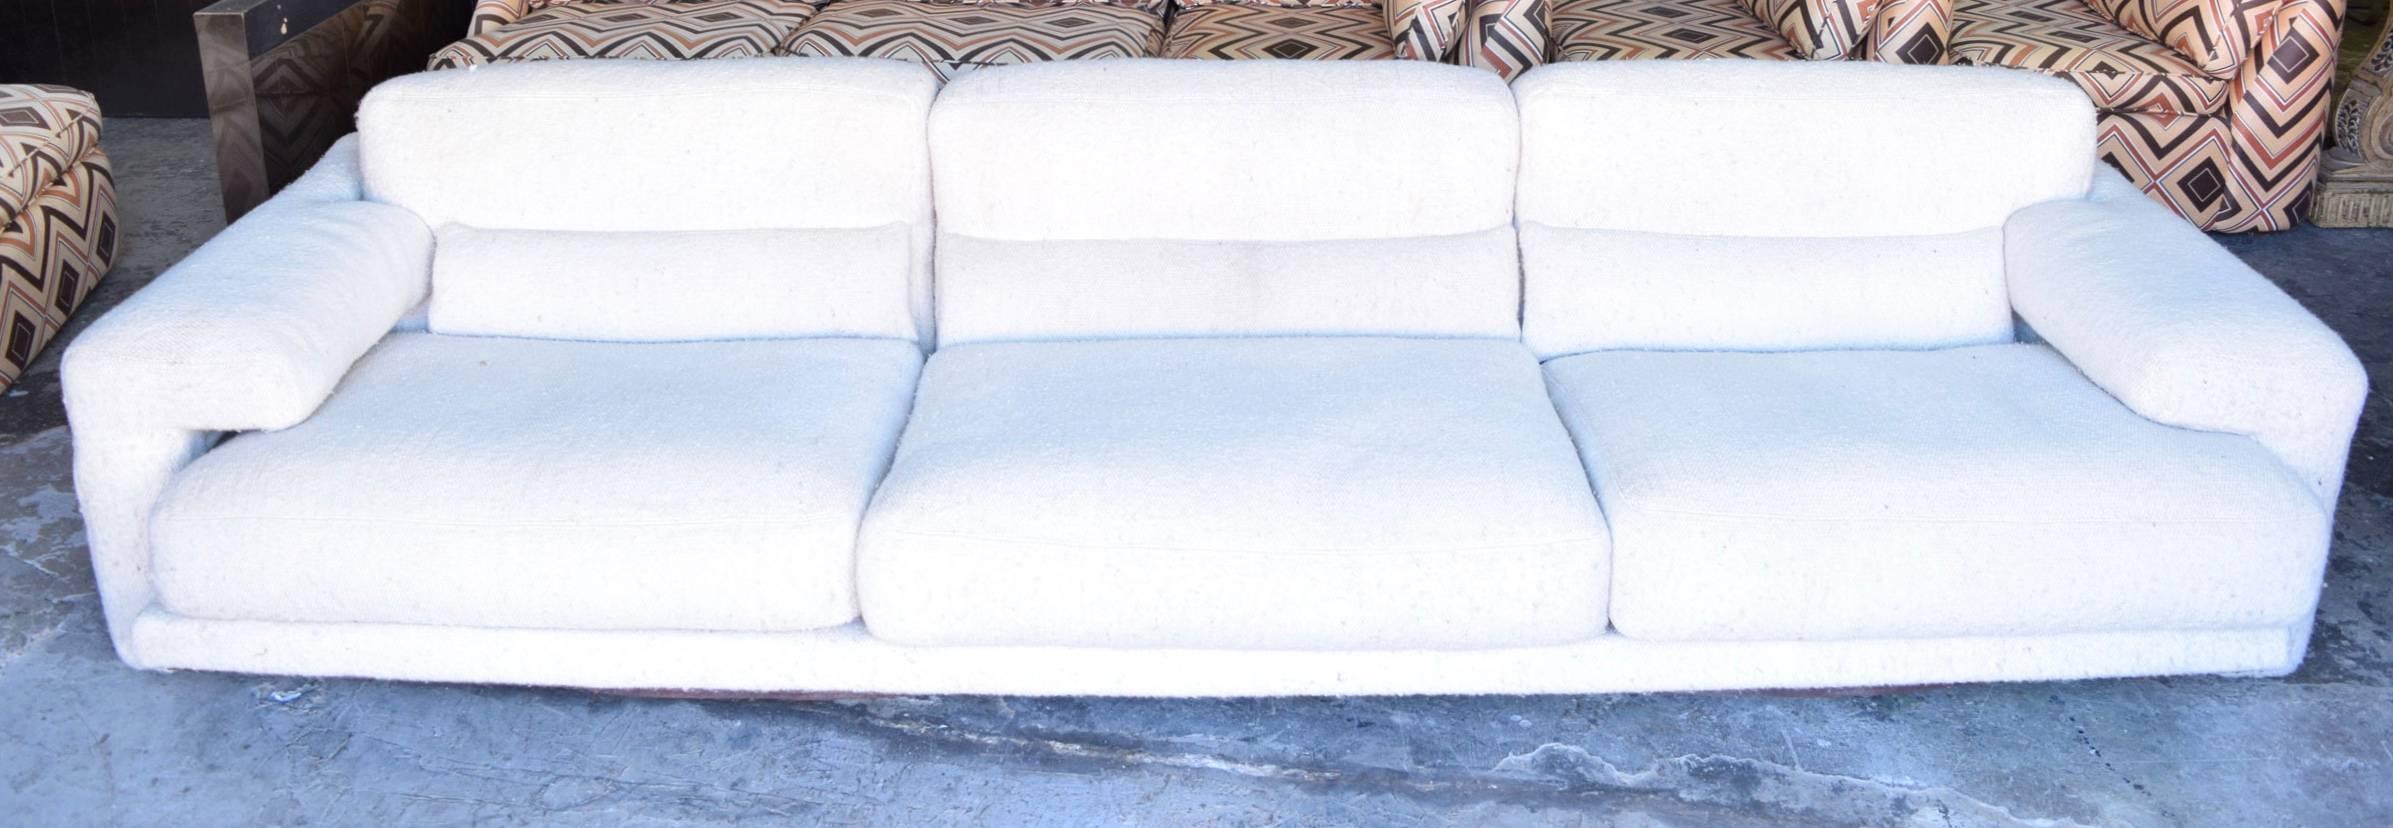 This sofa has great looks, deep seating high-quality construction and sex appeal! It does need reupholstery or a good cleaning which we can help with. Wool upholstery on sofa. Cushions are very heavy and down filled. The back is beautiful so sofa